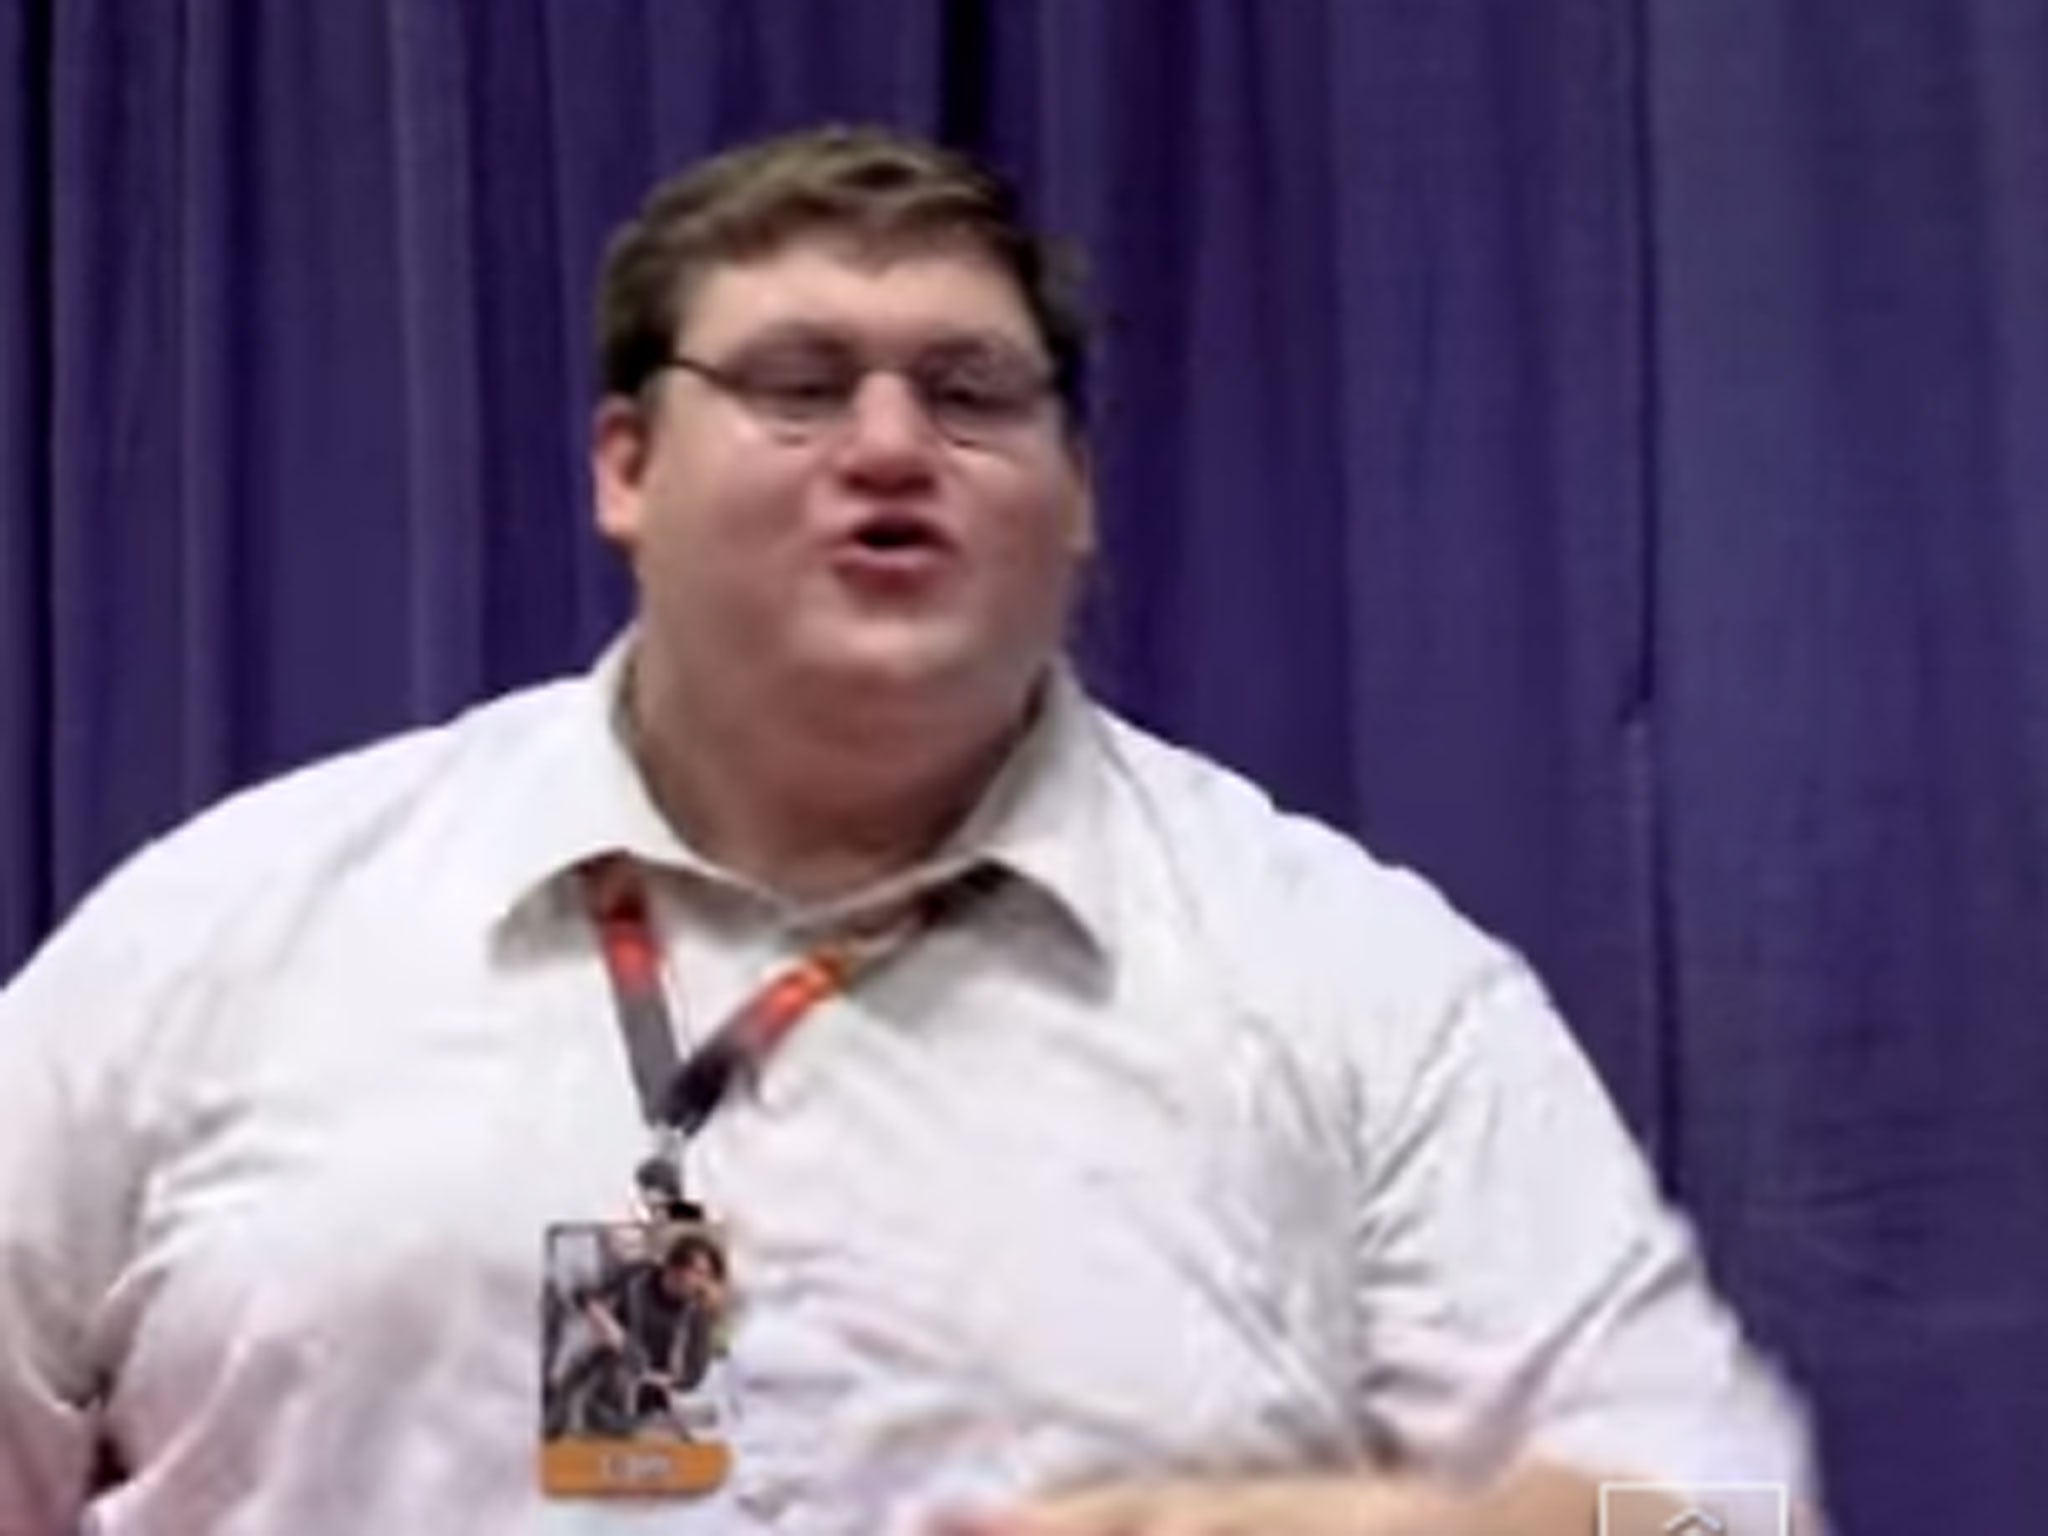 peter griffin real life